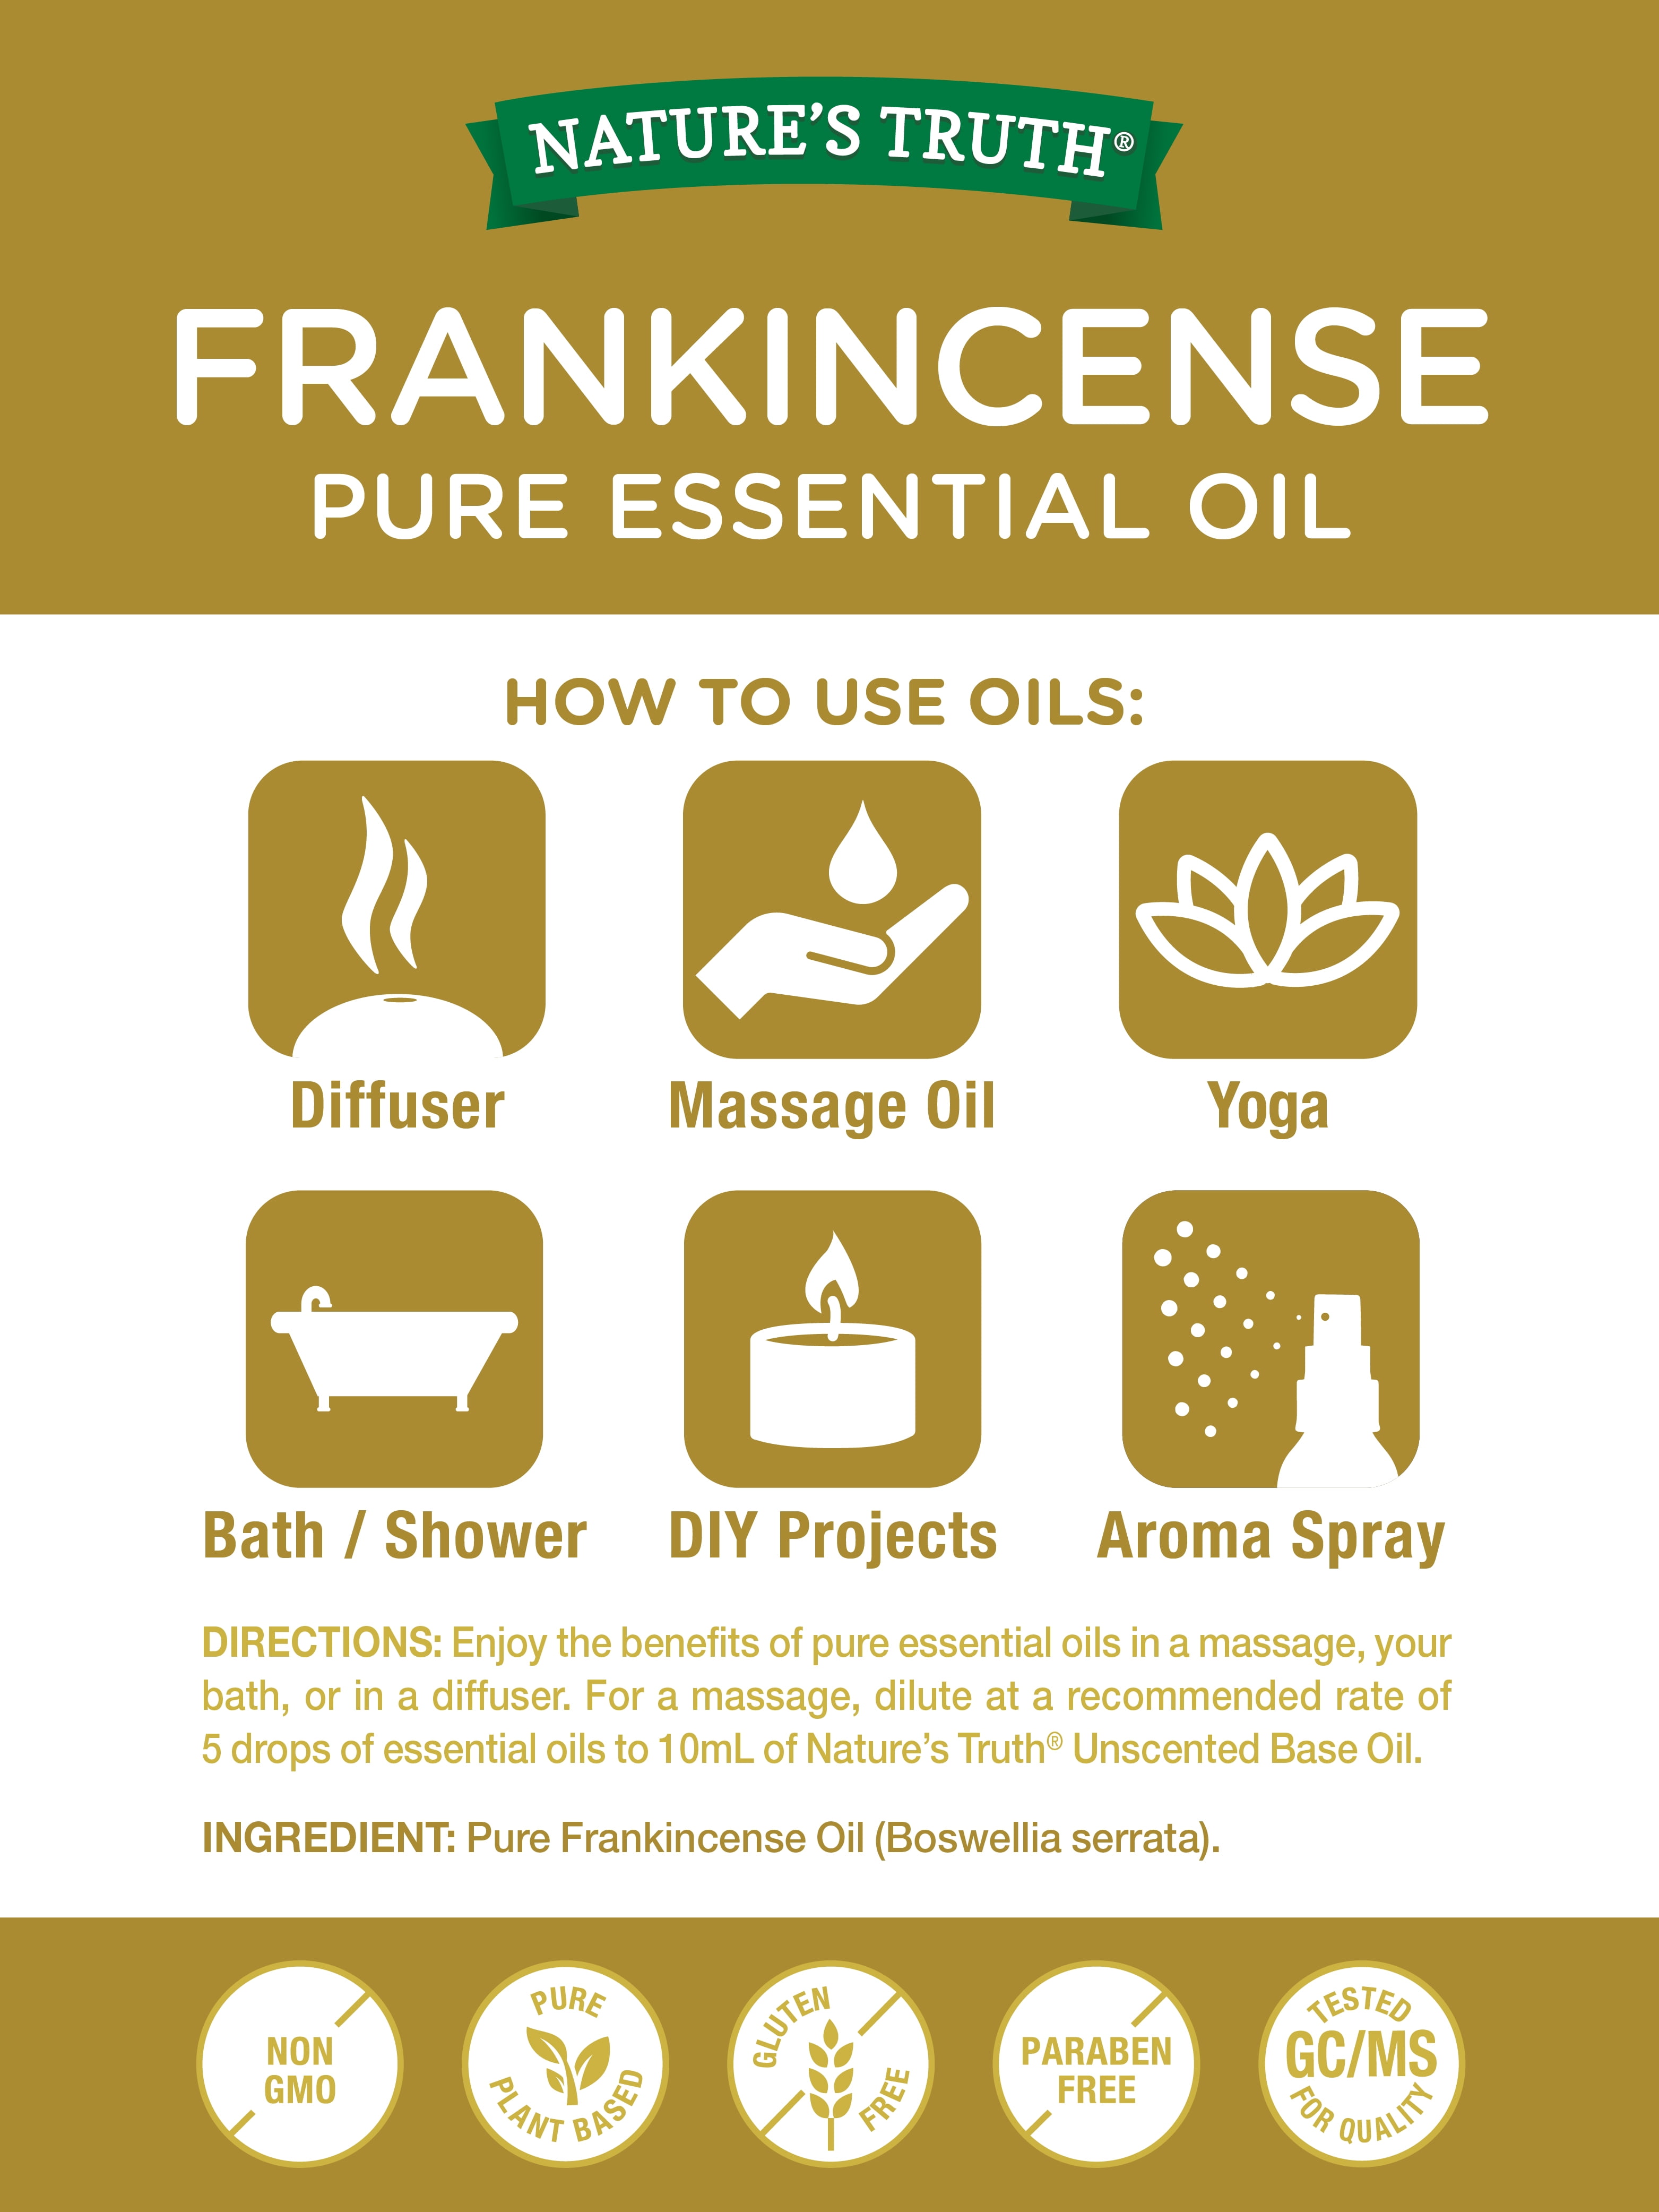 How do essential oil and fragrance oil differ and why does it matter? –  bare-soaps